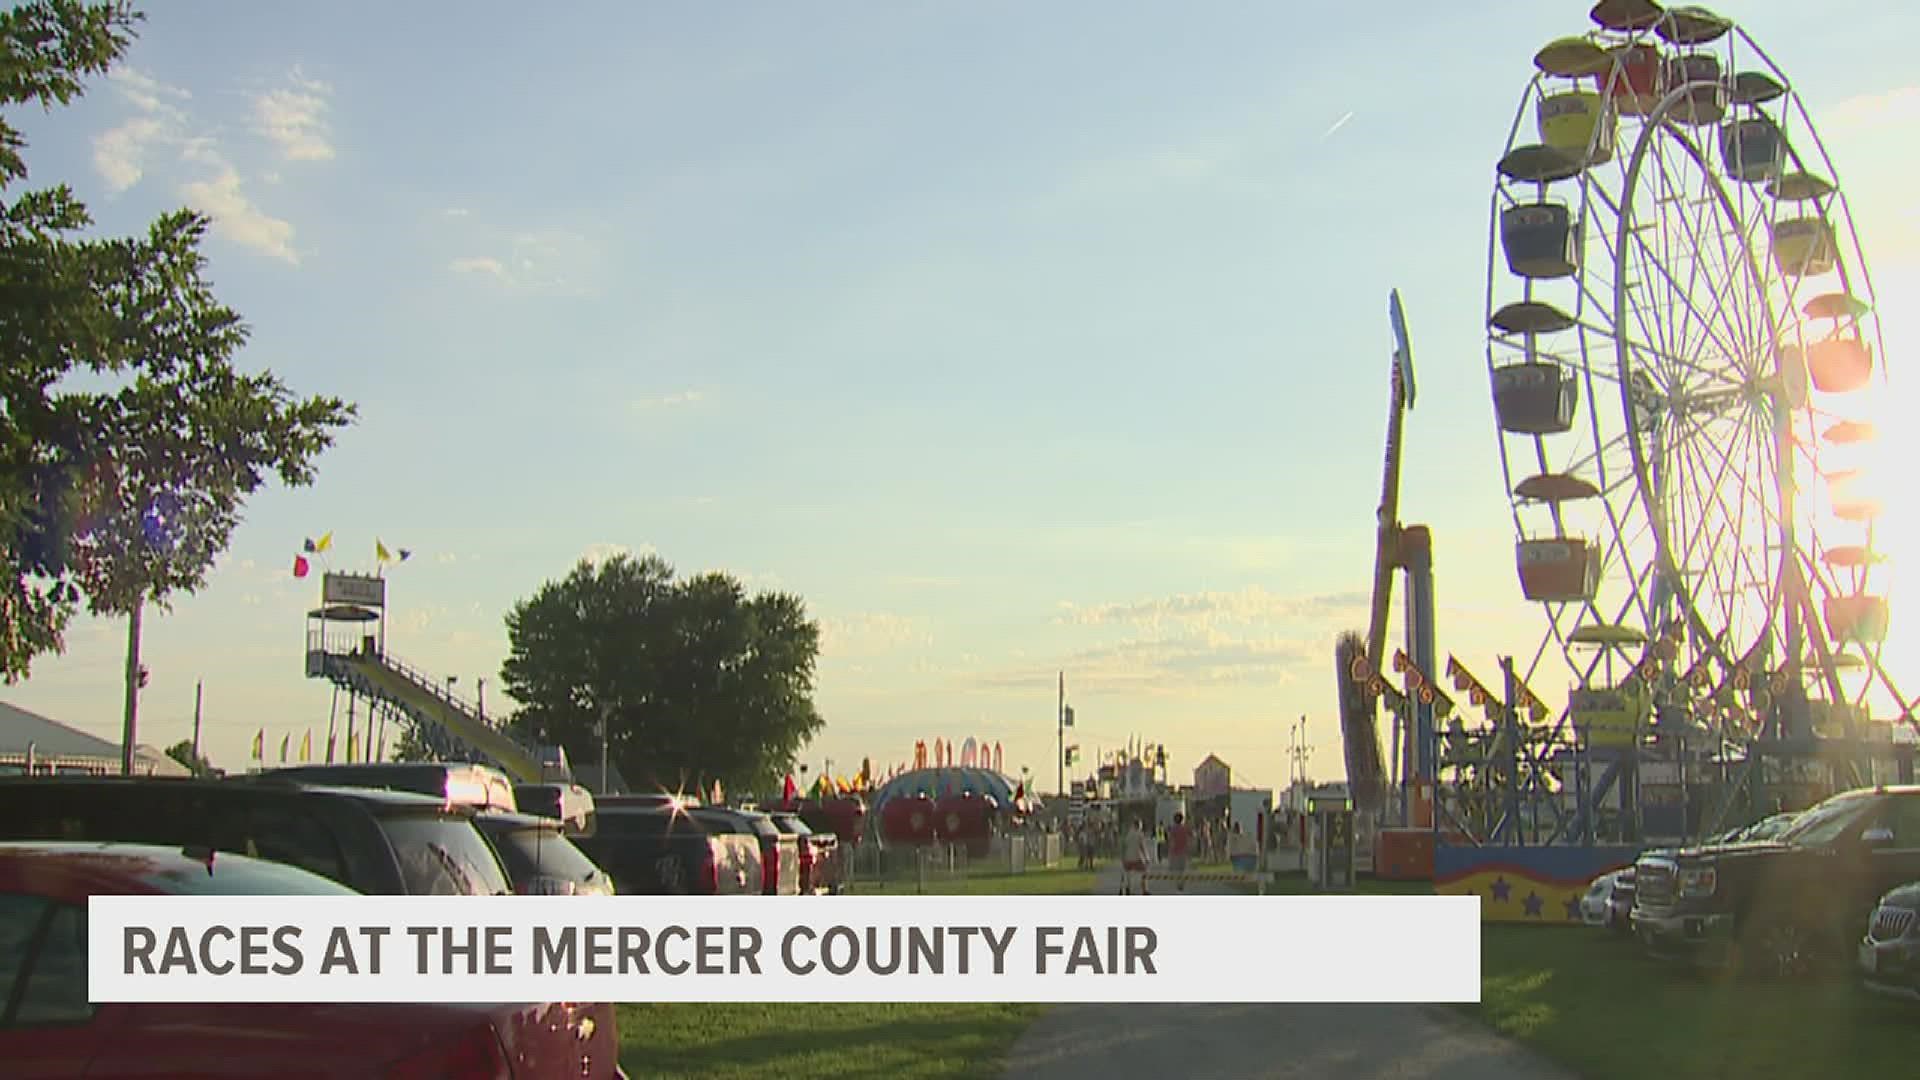 Summer carnivals throughout Iowa and Illinois